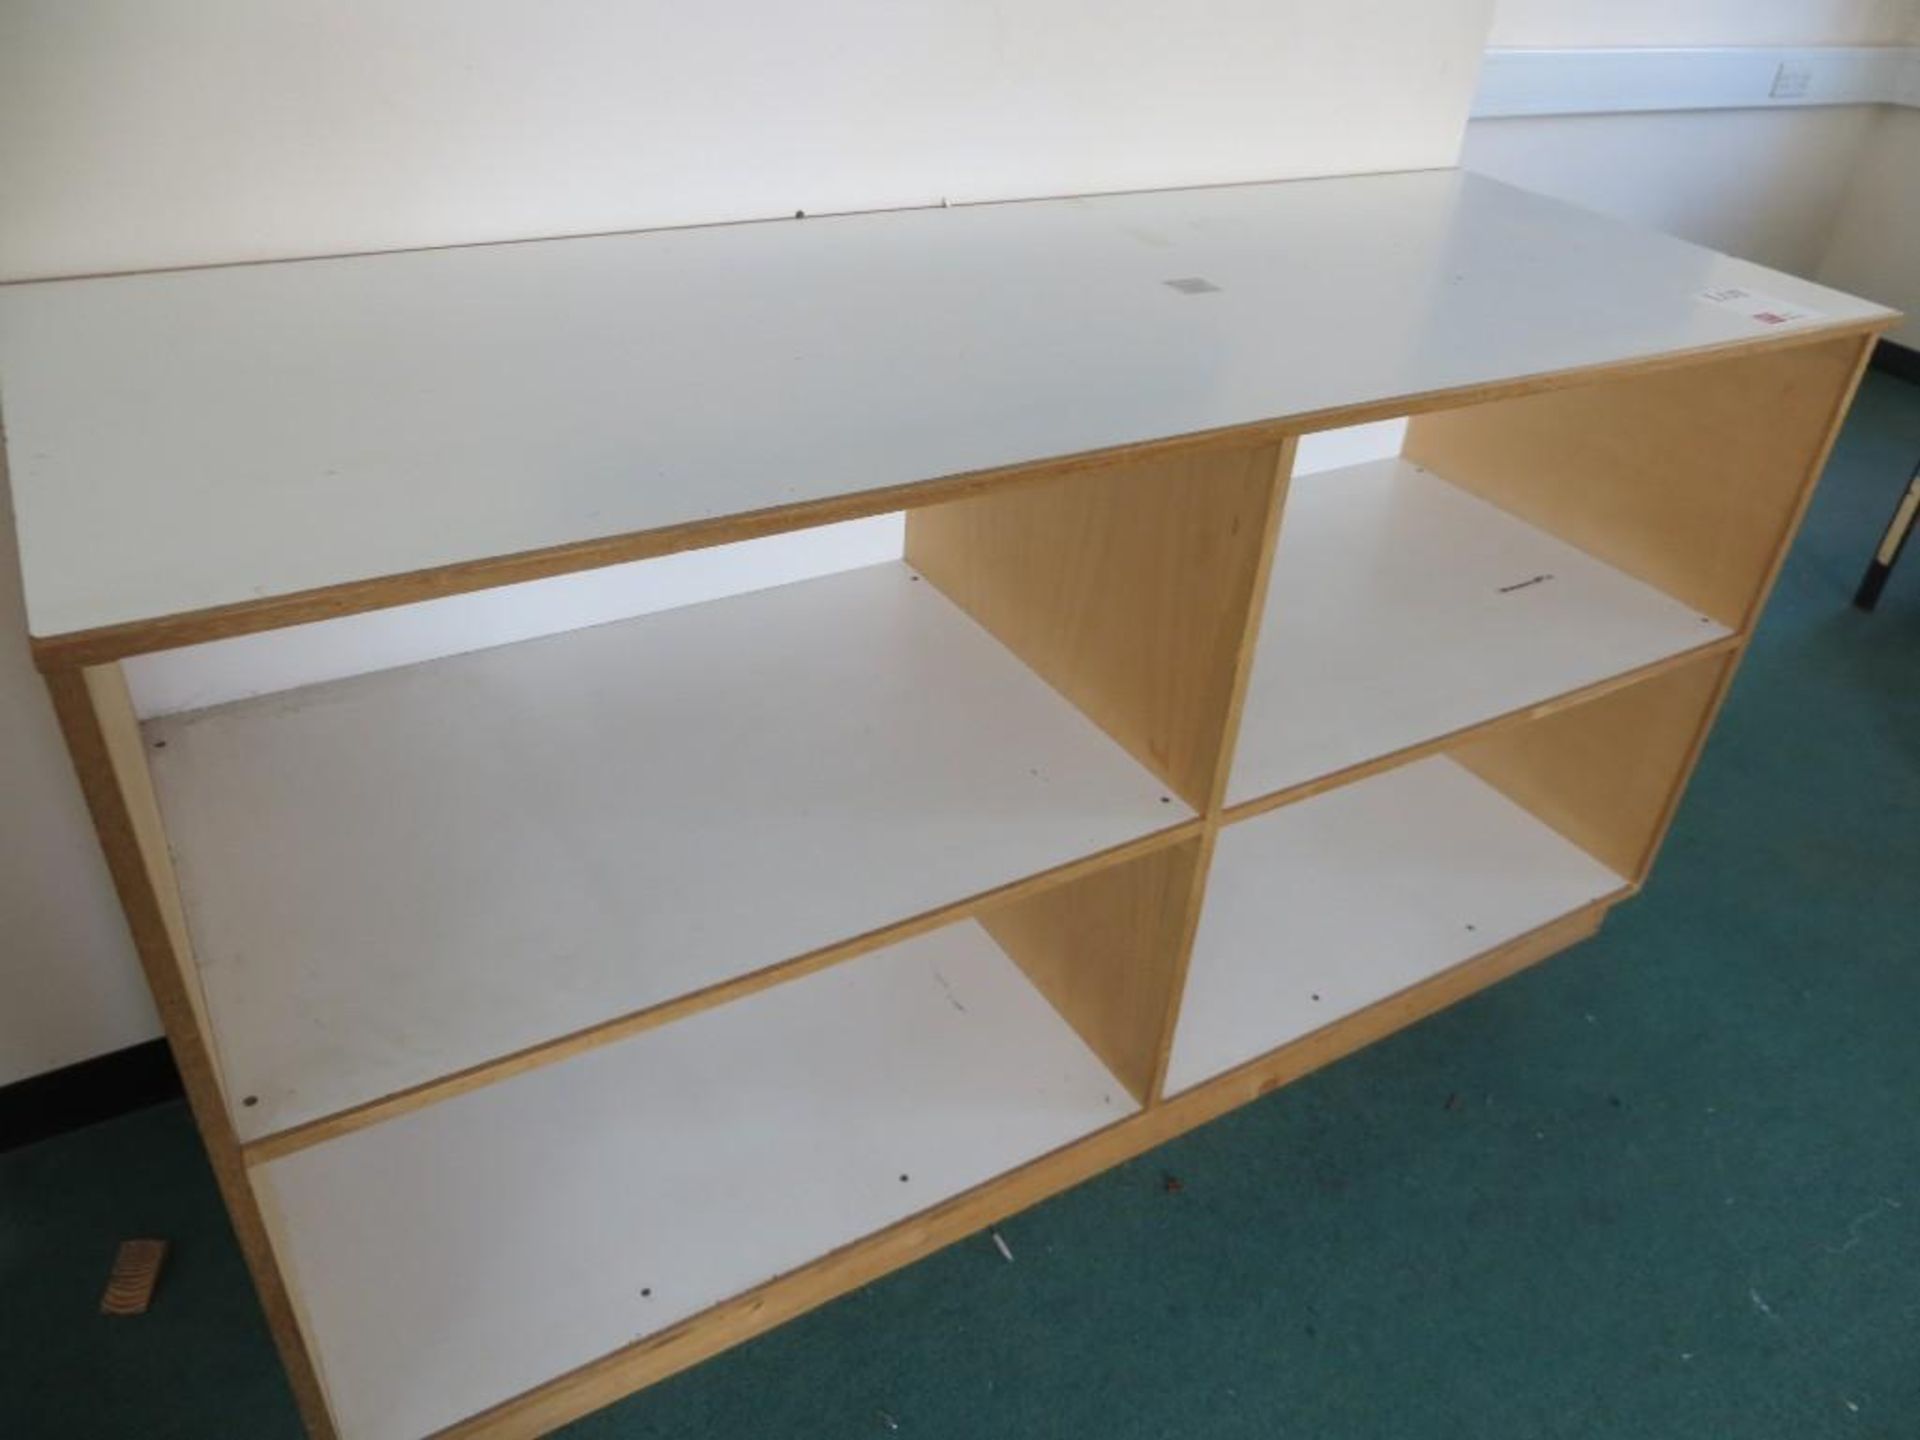 3 single pedastal desks, table, 4 position storage cabinet, coffee table, 5 notice boards and an - Image 6 of 8